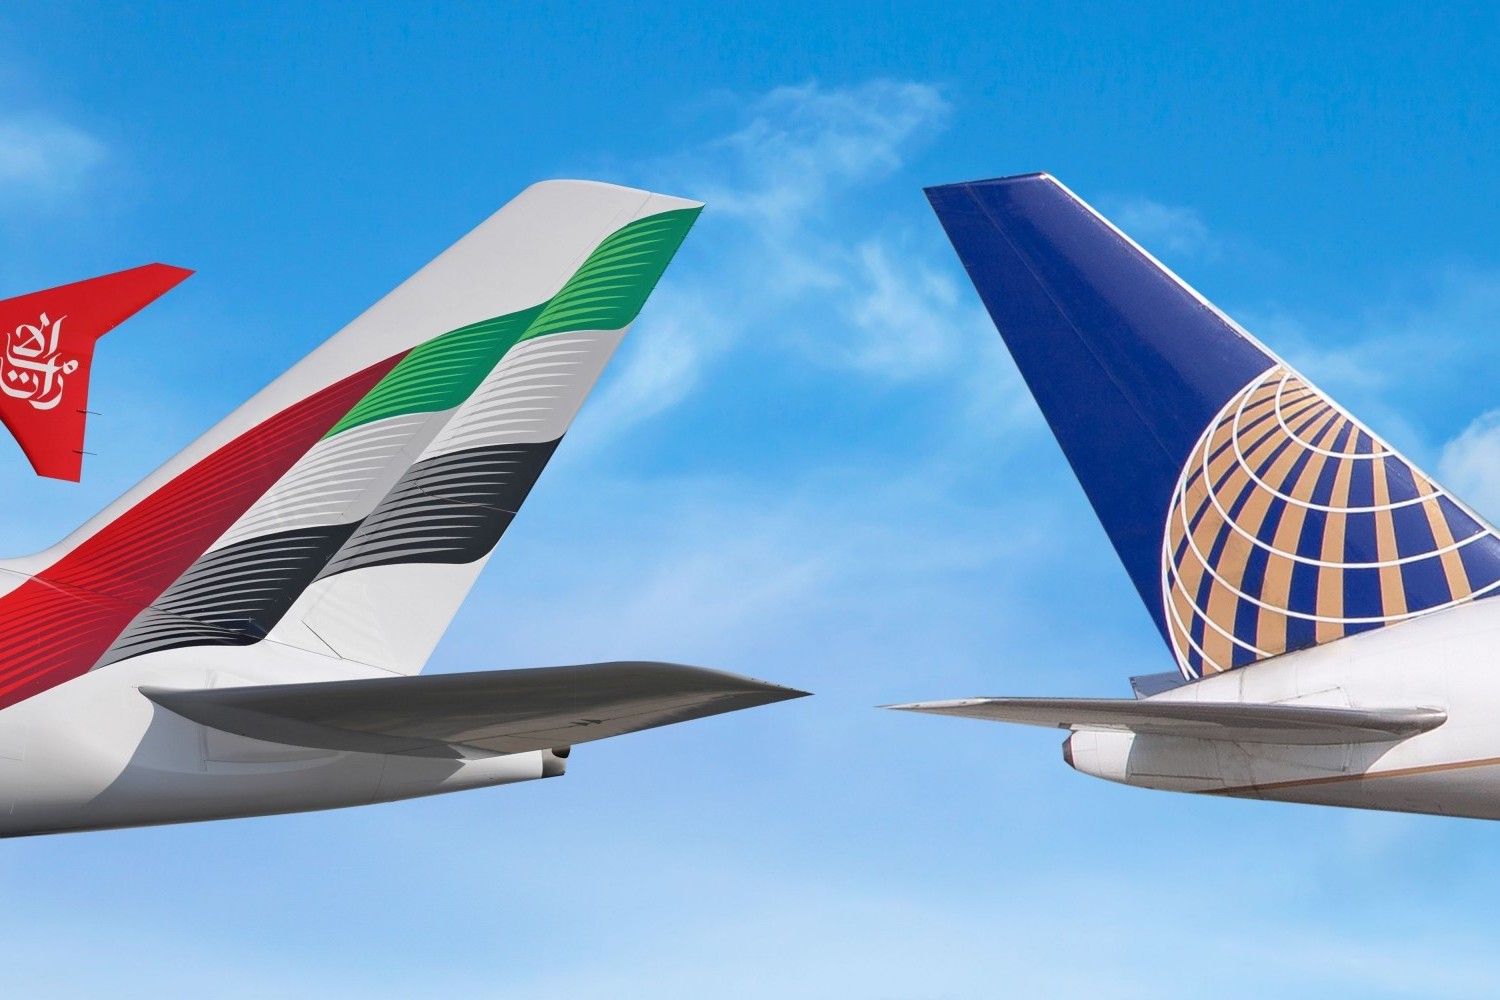 The tails of an Emirates and United Airlines aircraft side by side.